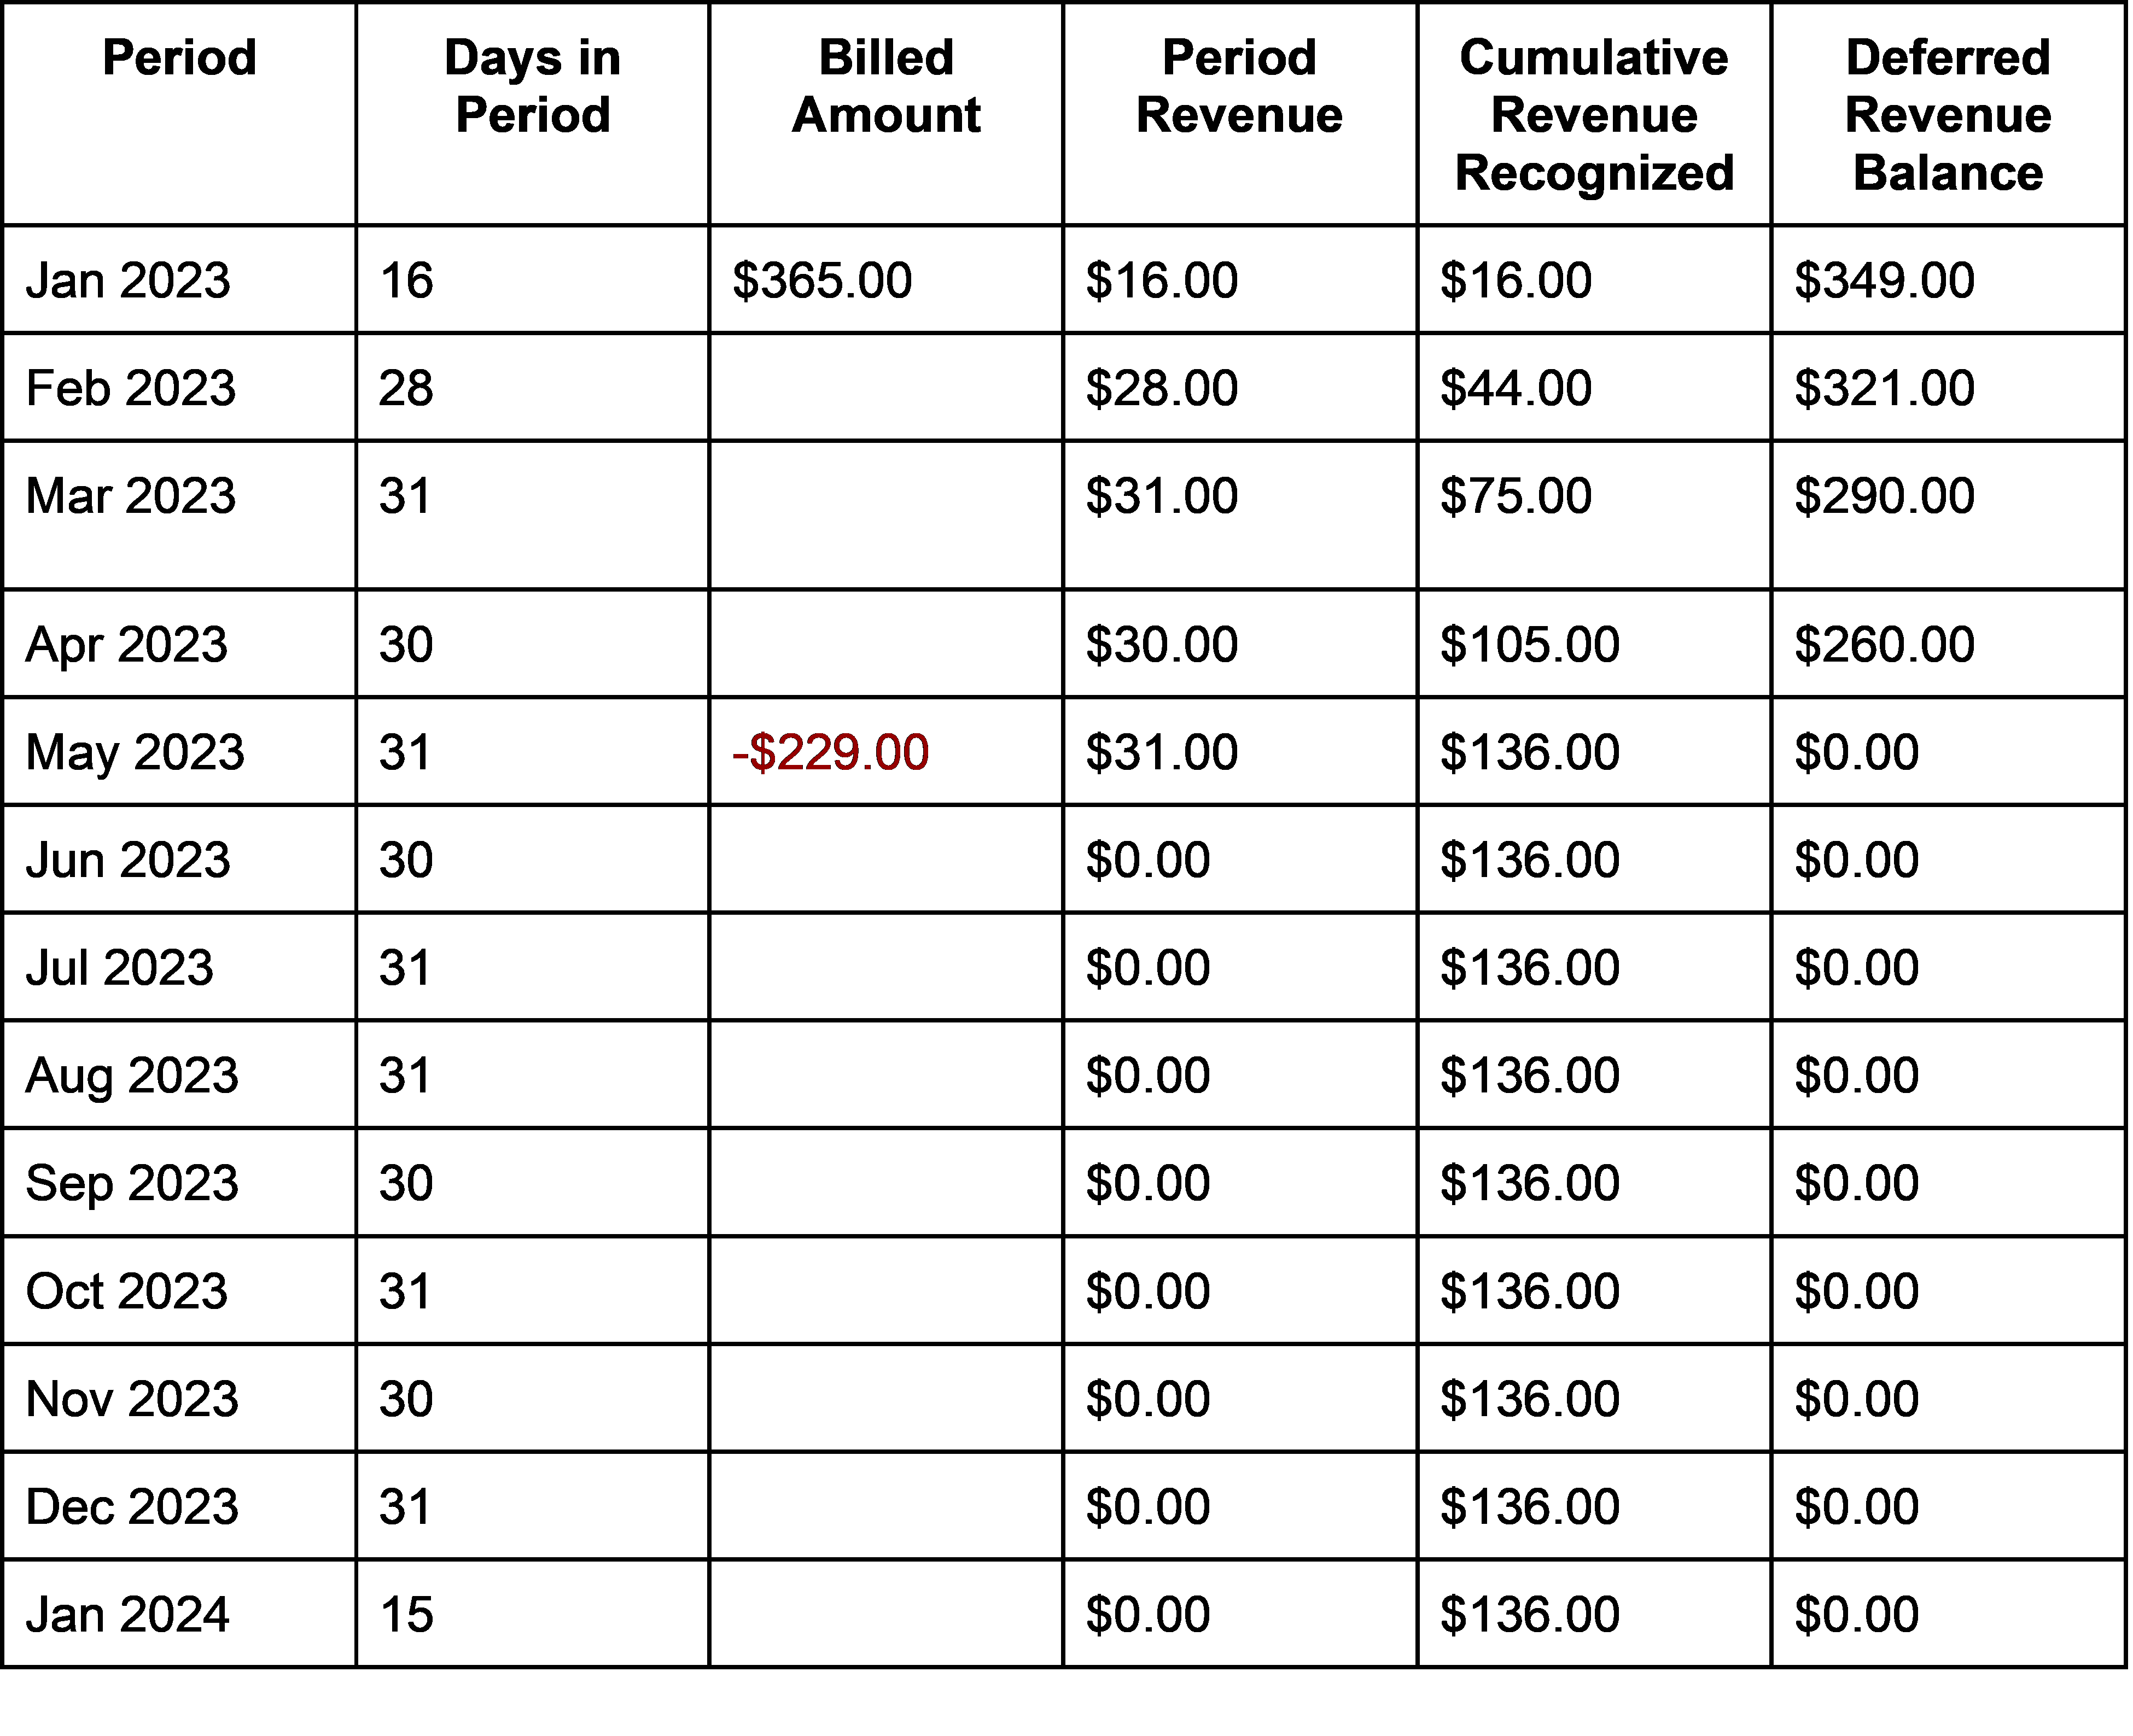 contraction or churn SaaS revenue recognition schedule with refund